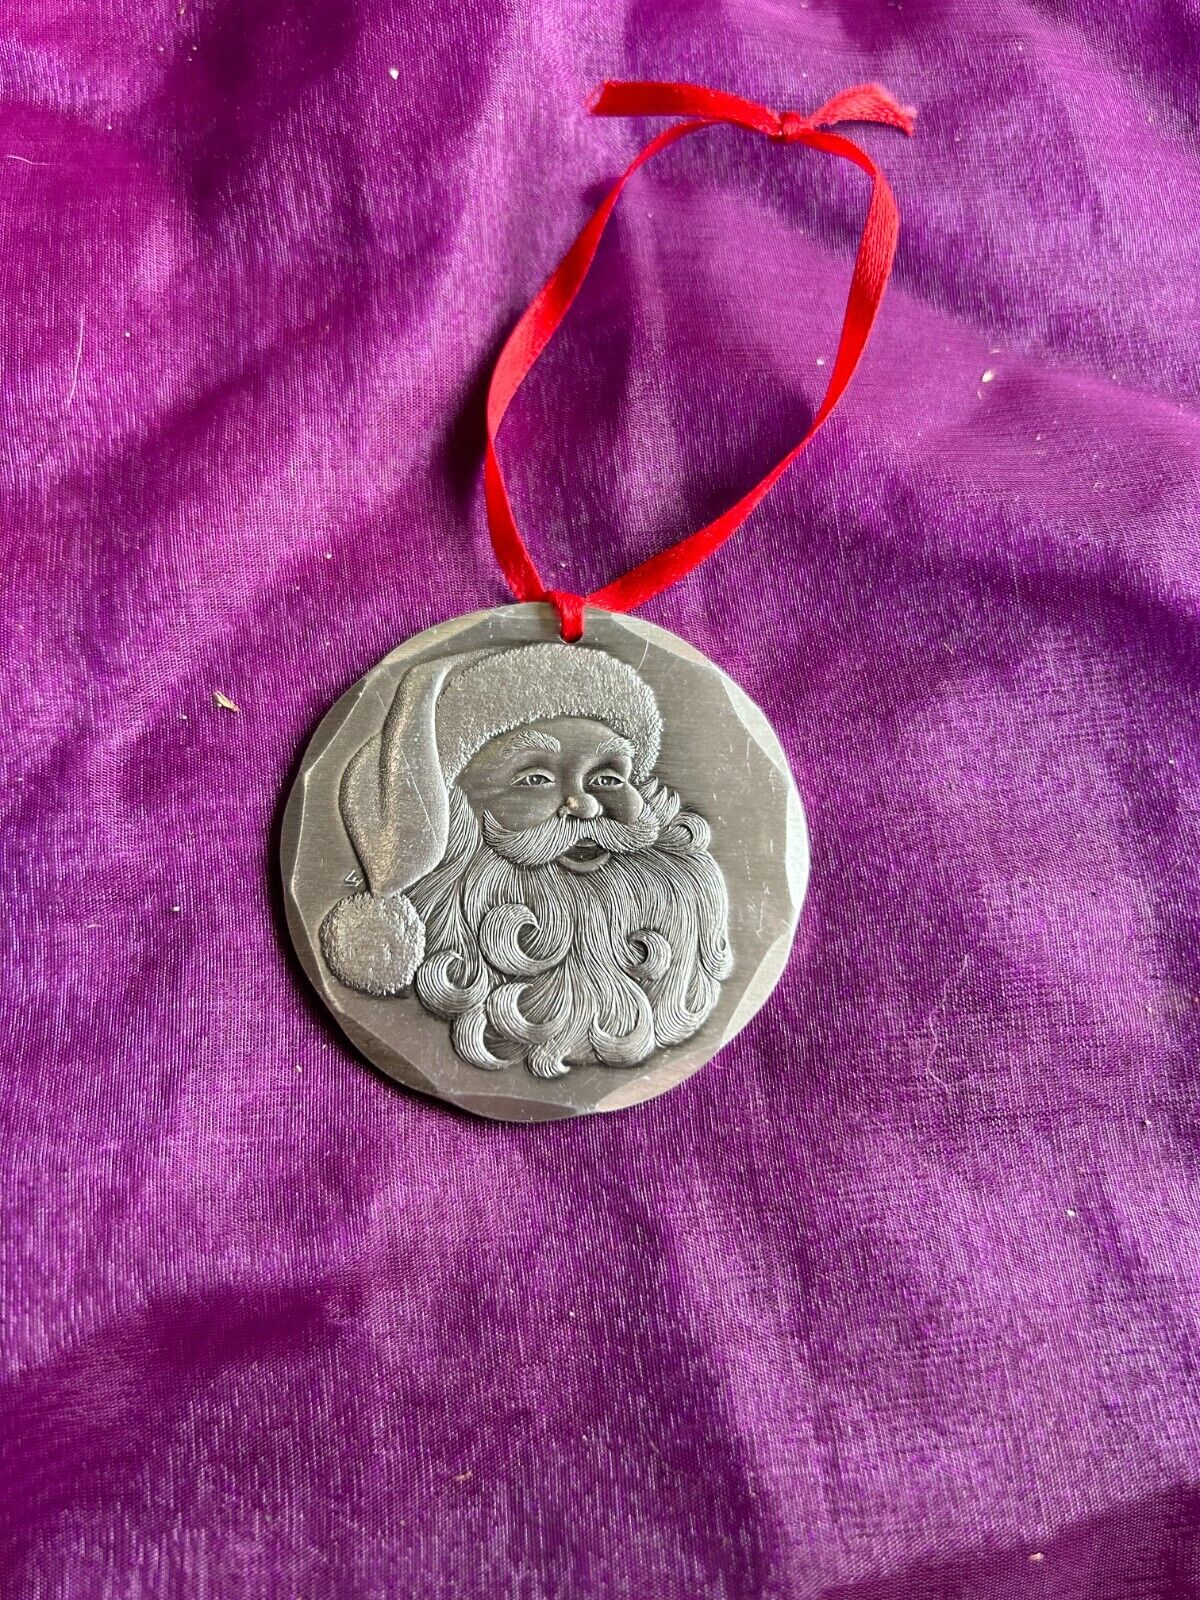 Wendell August Forge ornament 1991 Santa Claus Face